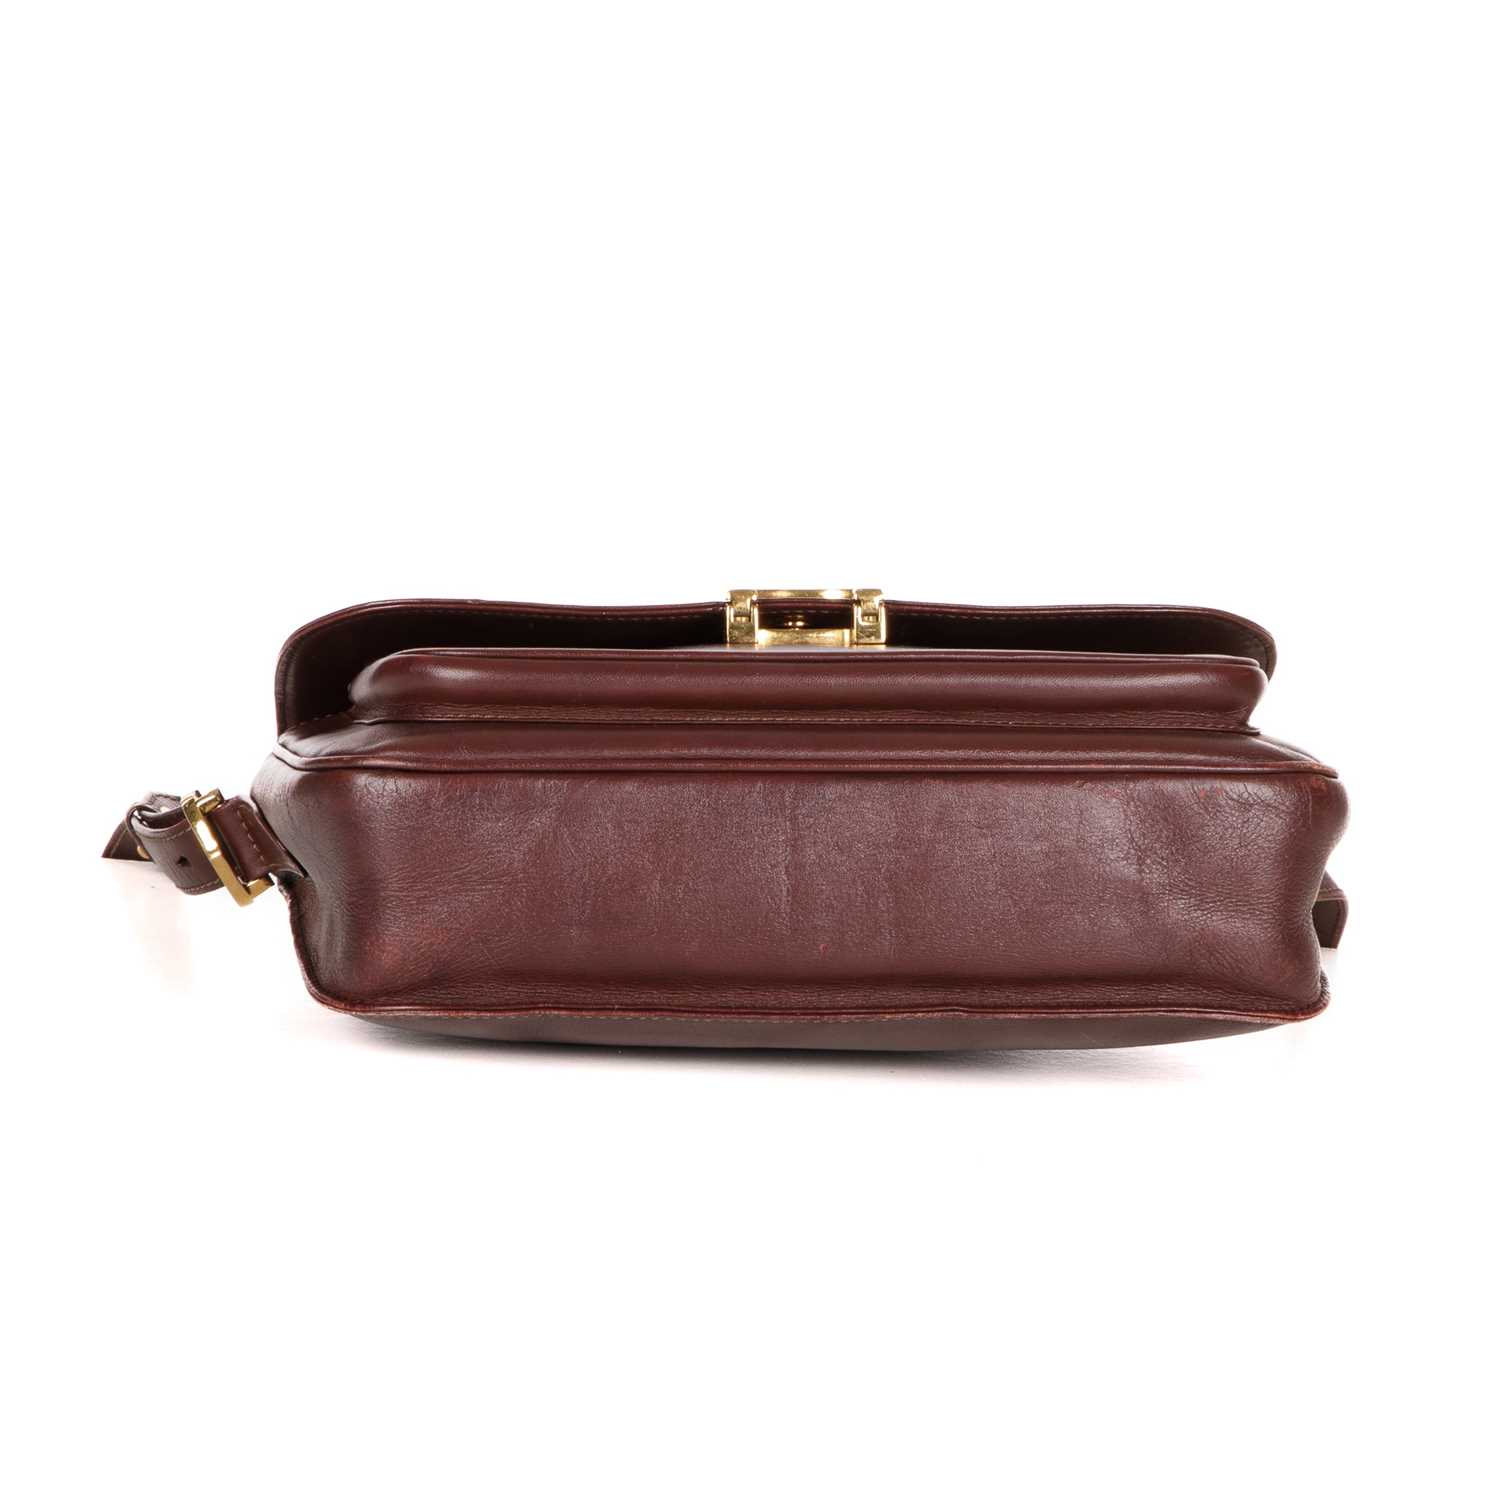 Cartier, a Bordeaux leather handbag, designed with a burgundy leather exterior, featuring gold- - Image 4 of 4